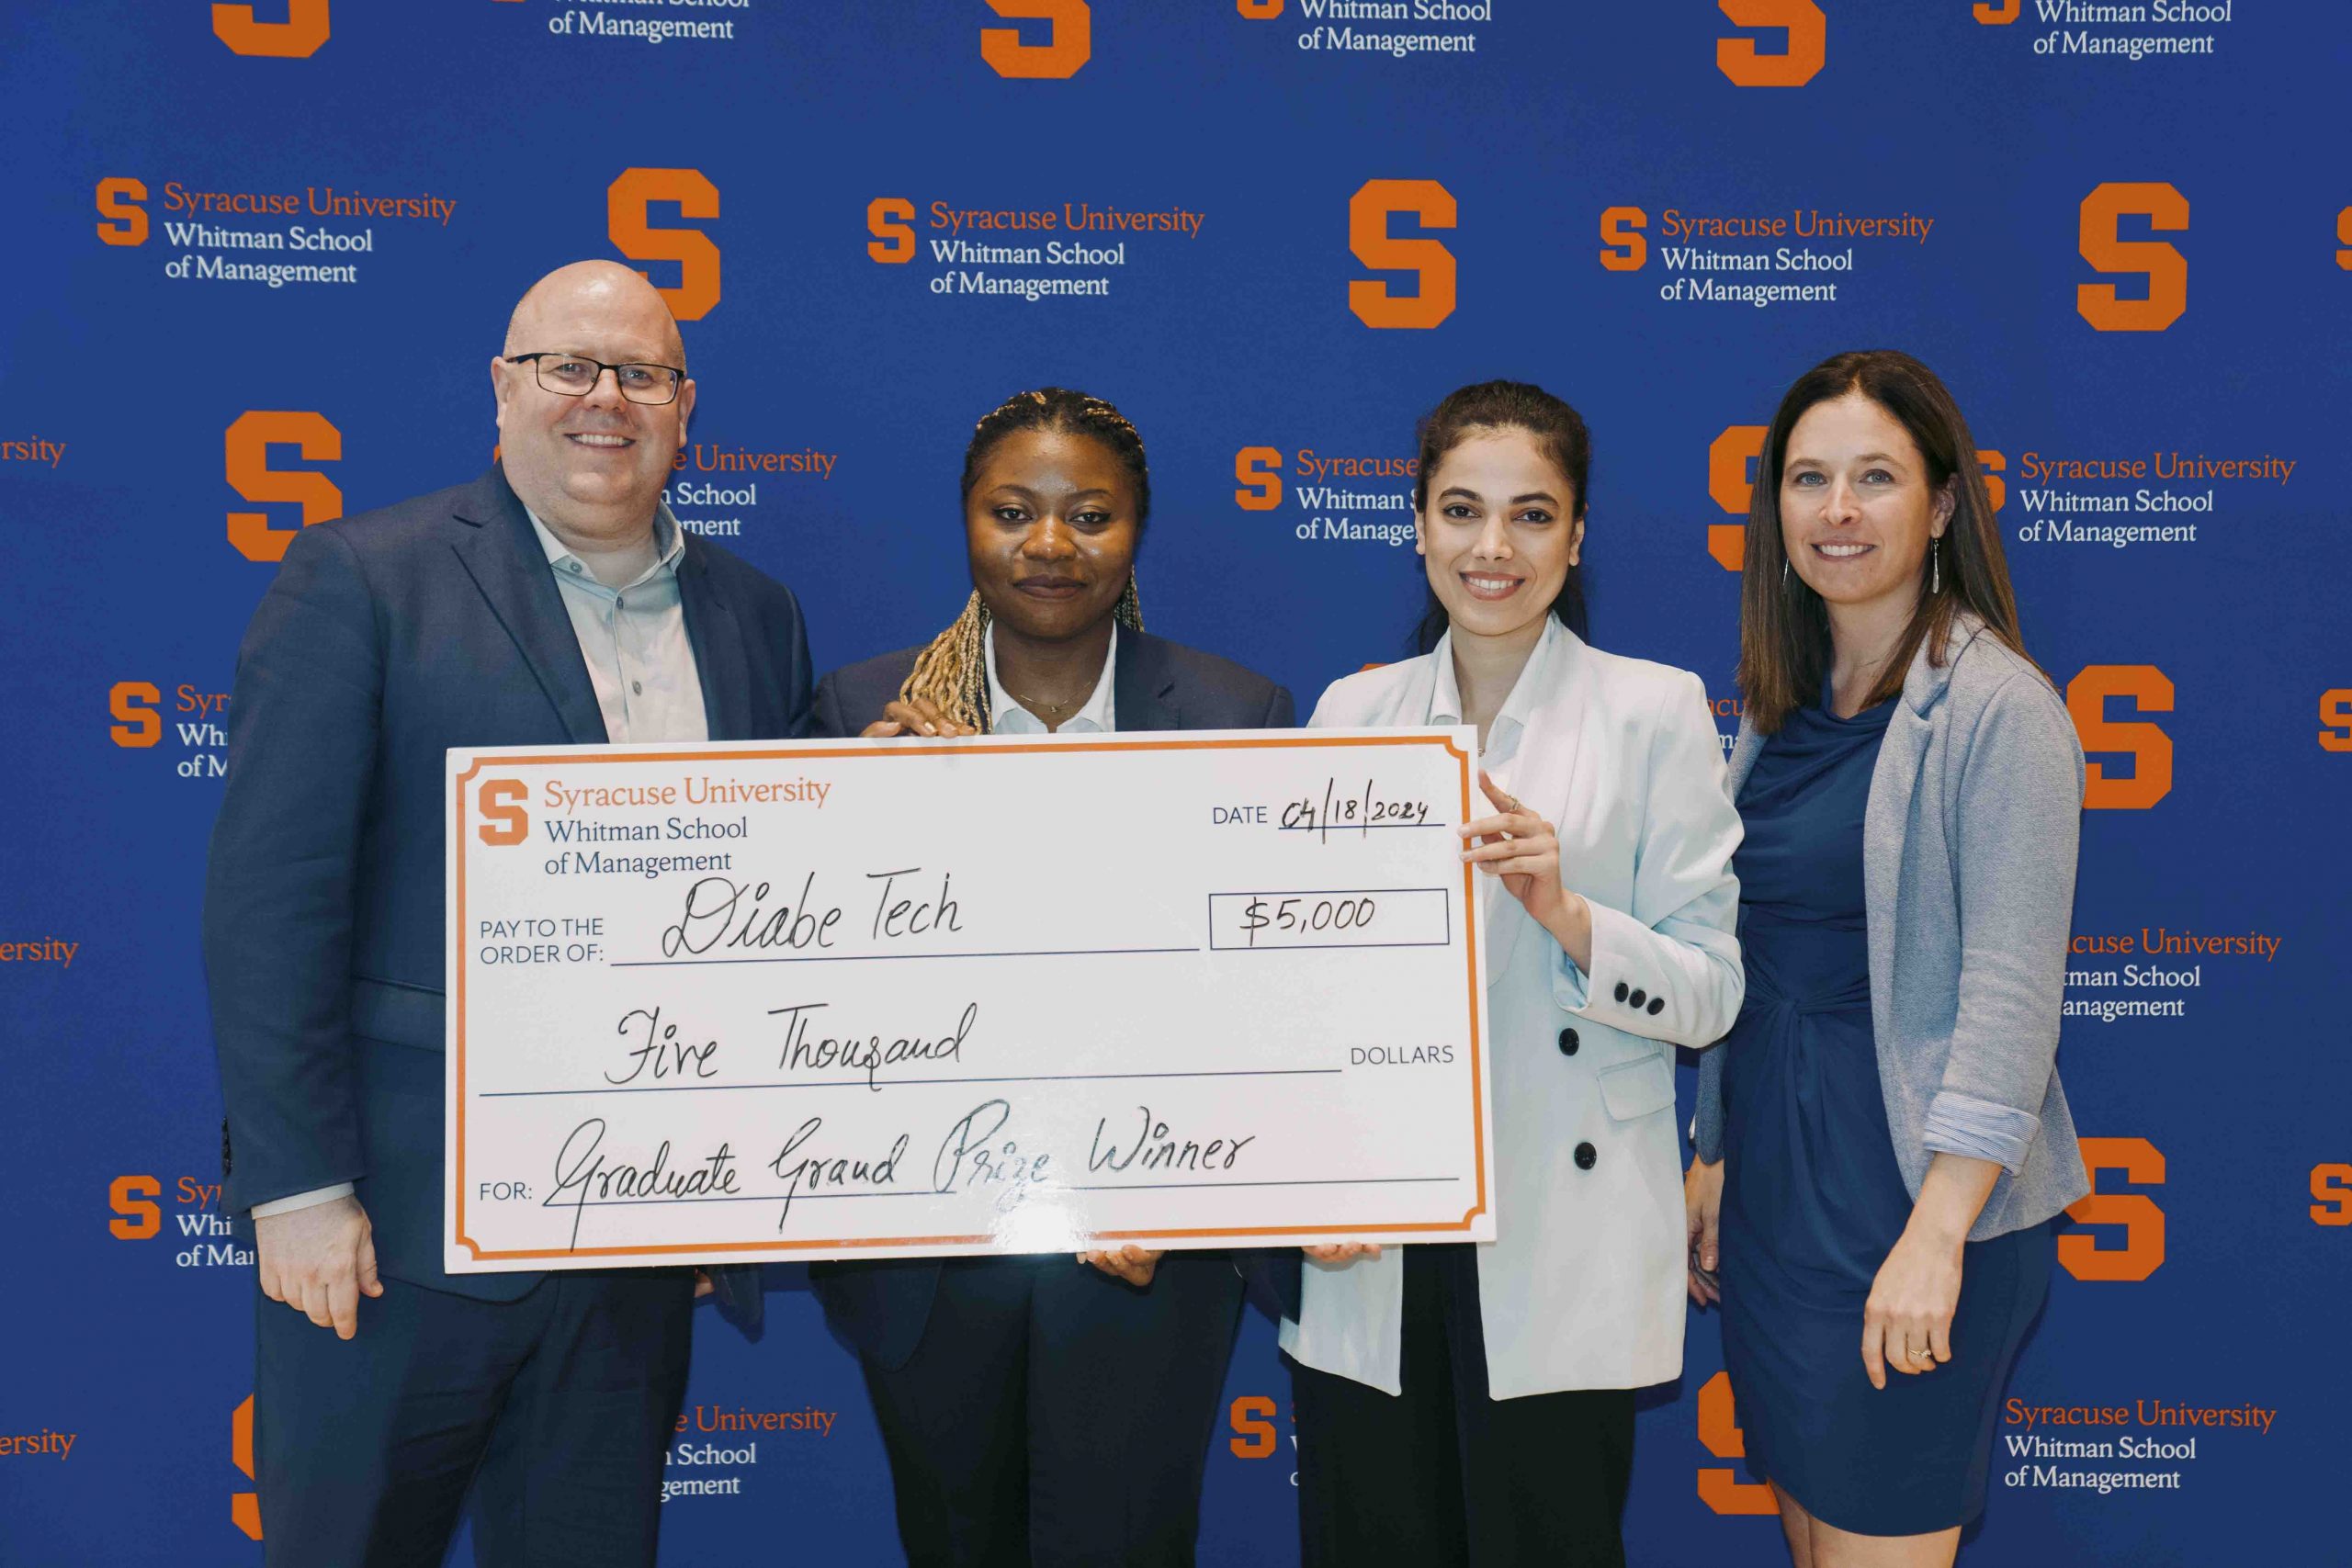 Four people standing together holding an oversized check